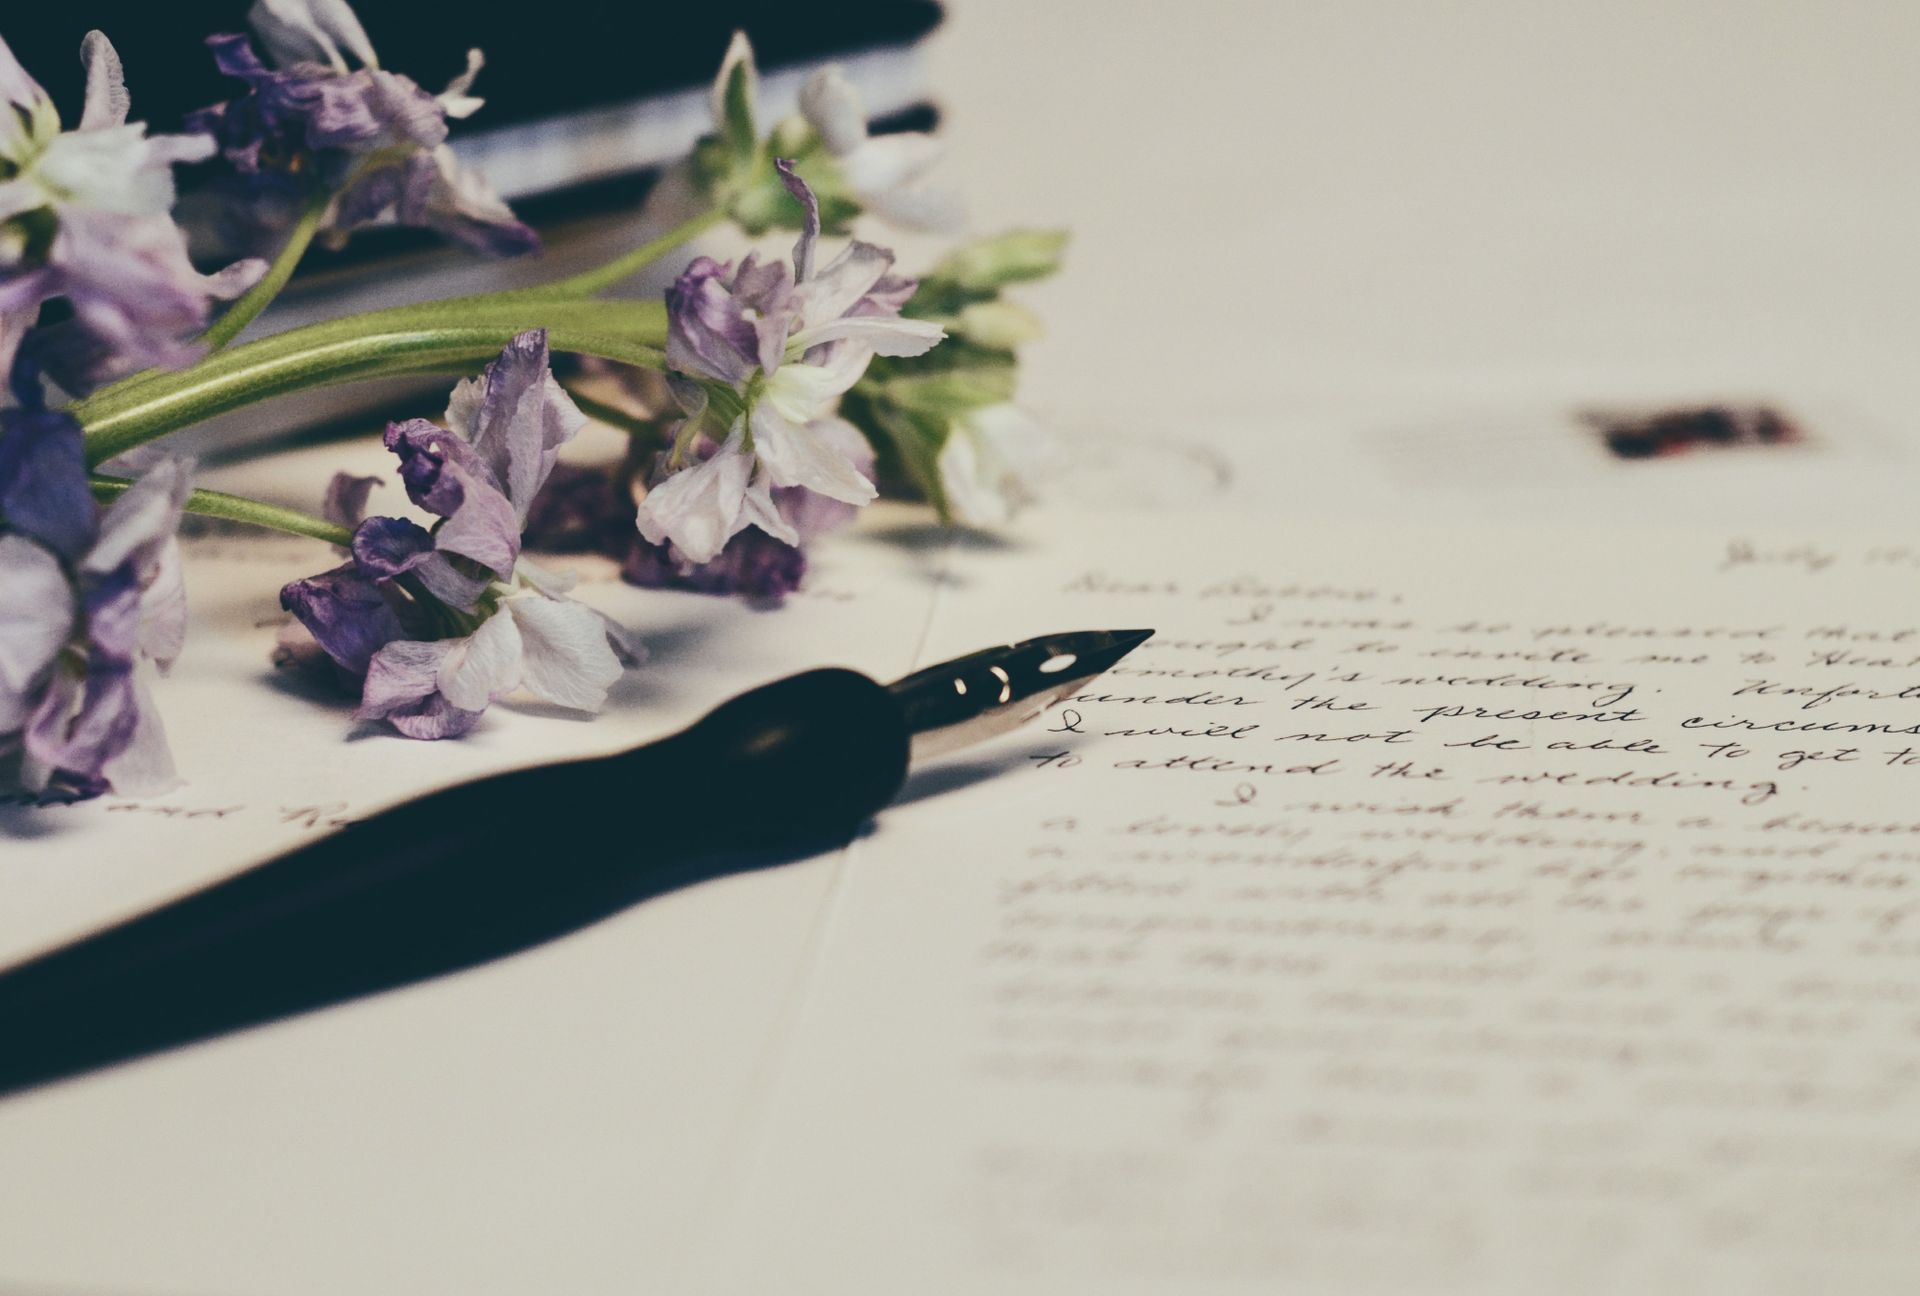 How to Write A condolences Letter to families that are grieving from a death